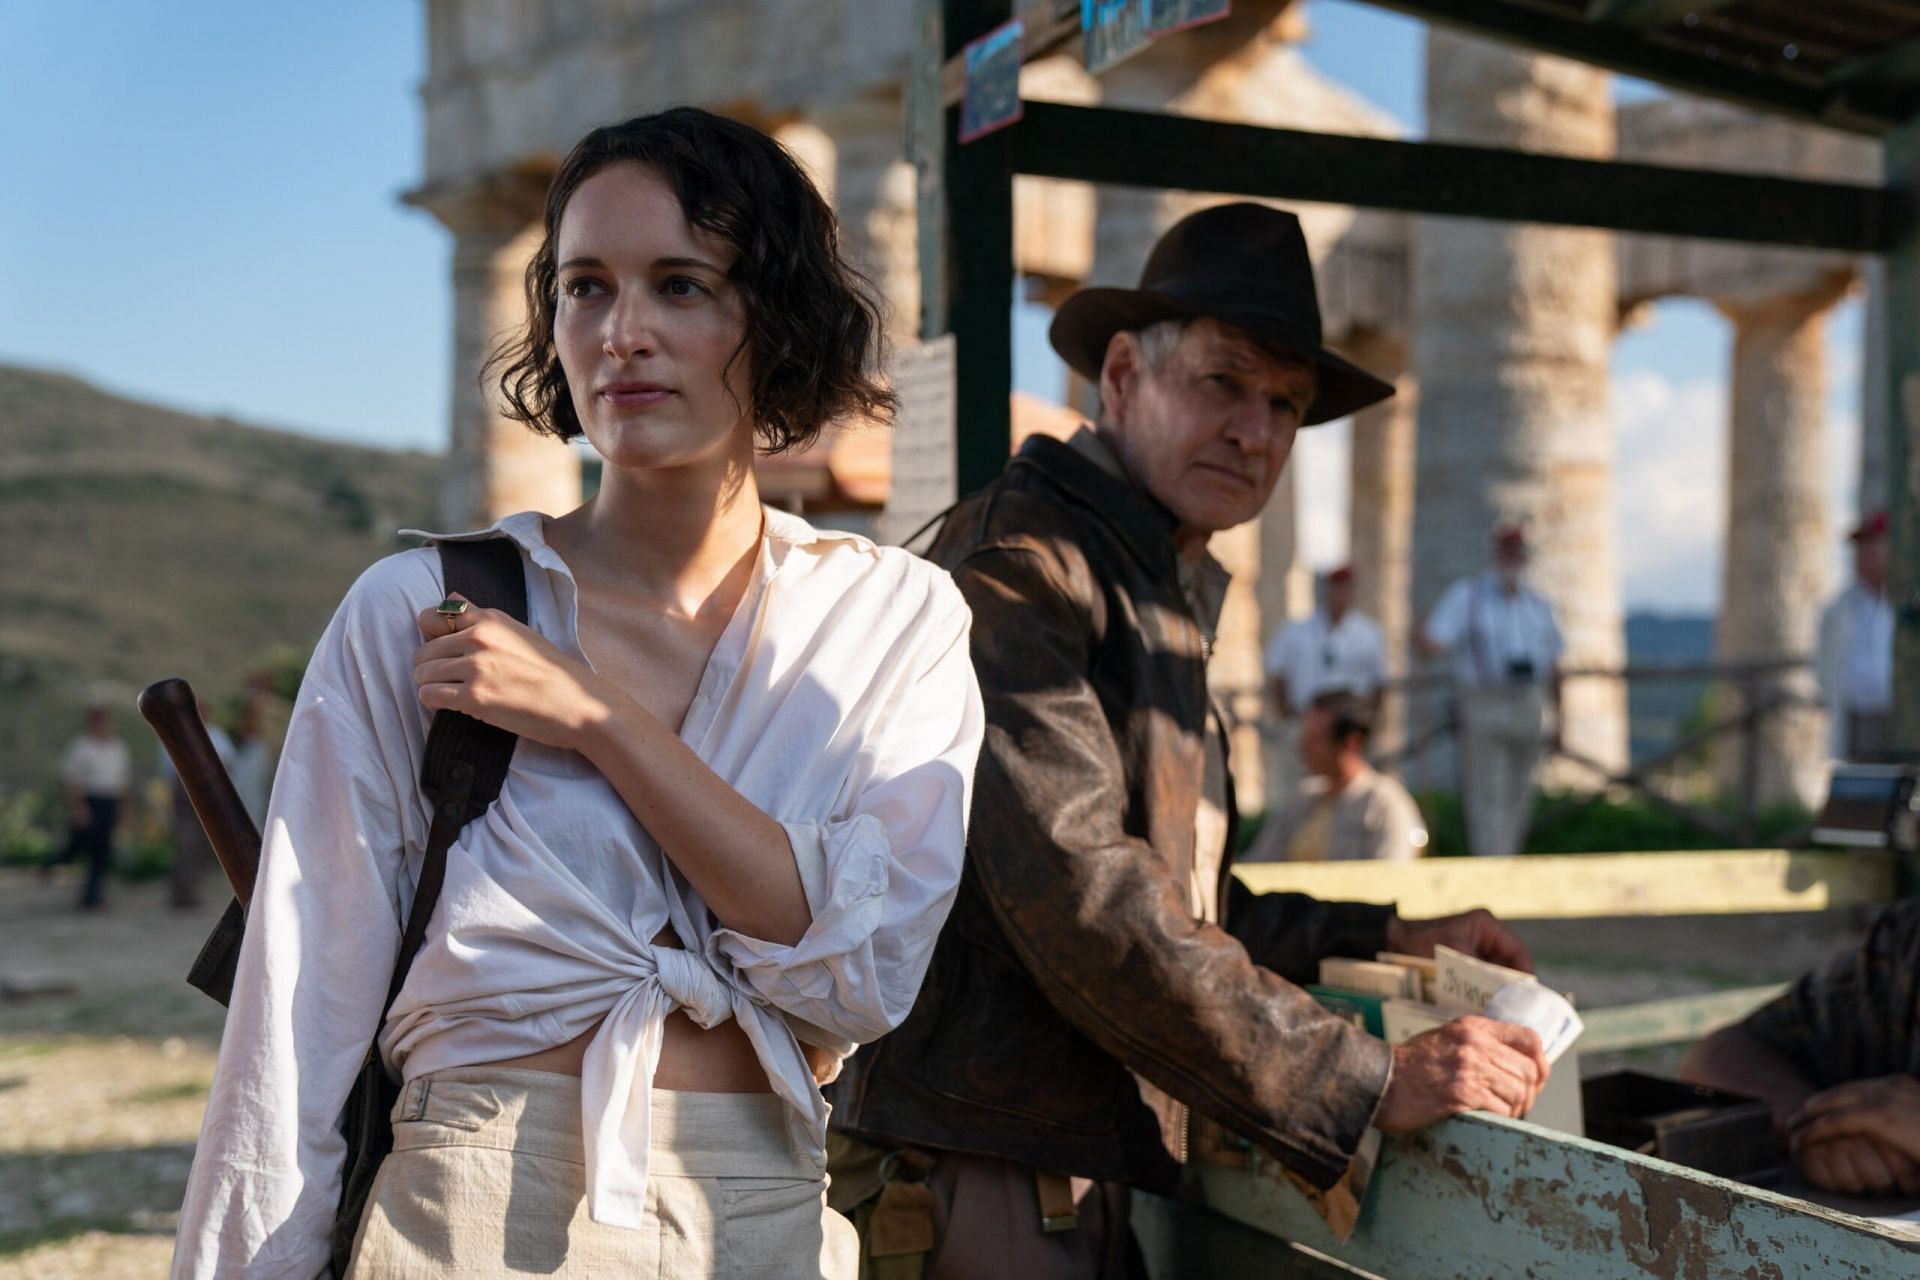 Phoebe Waller-Bridge and Harrison Ford in Indiana Jones and the Dial of Destiny (Image via Disney)